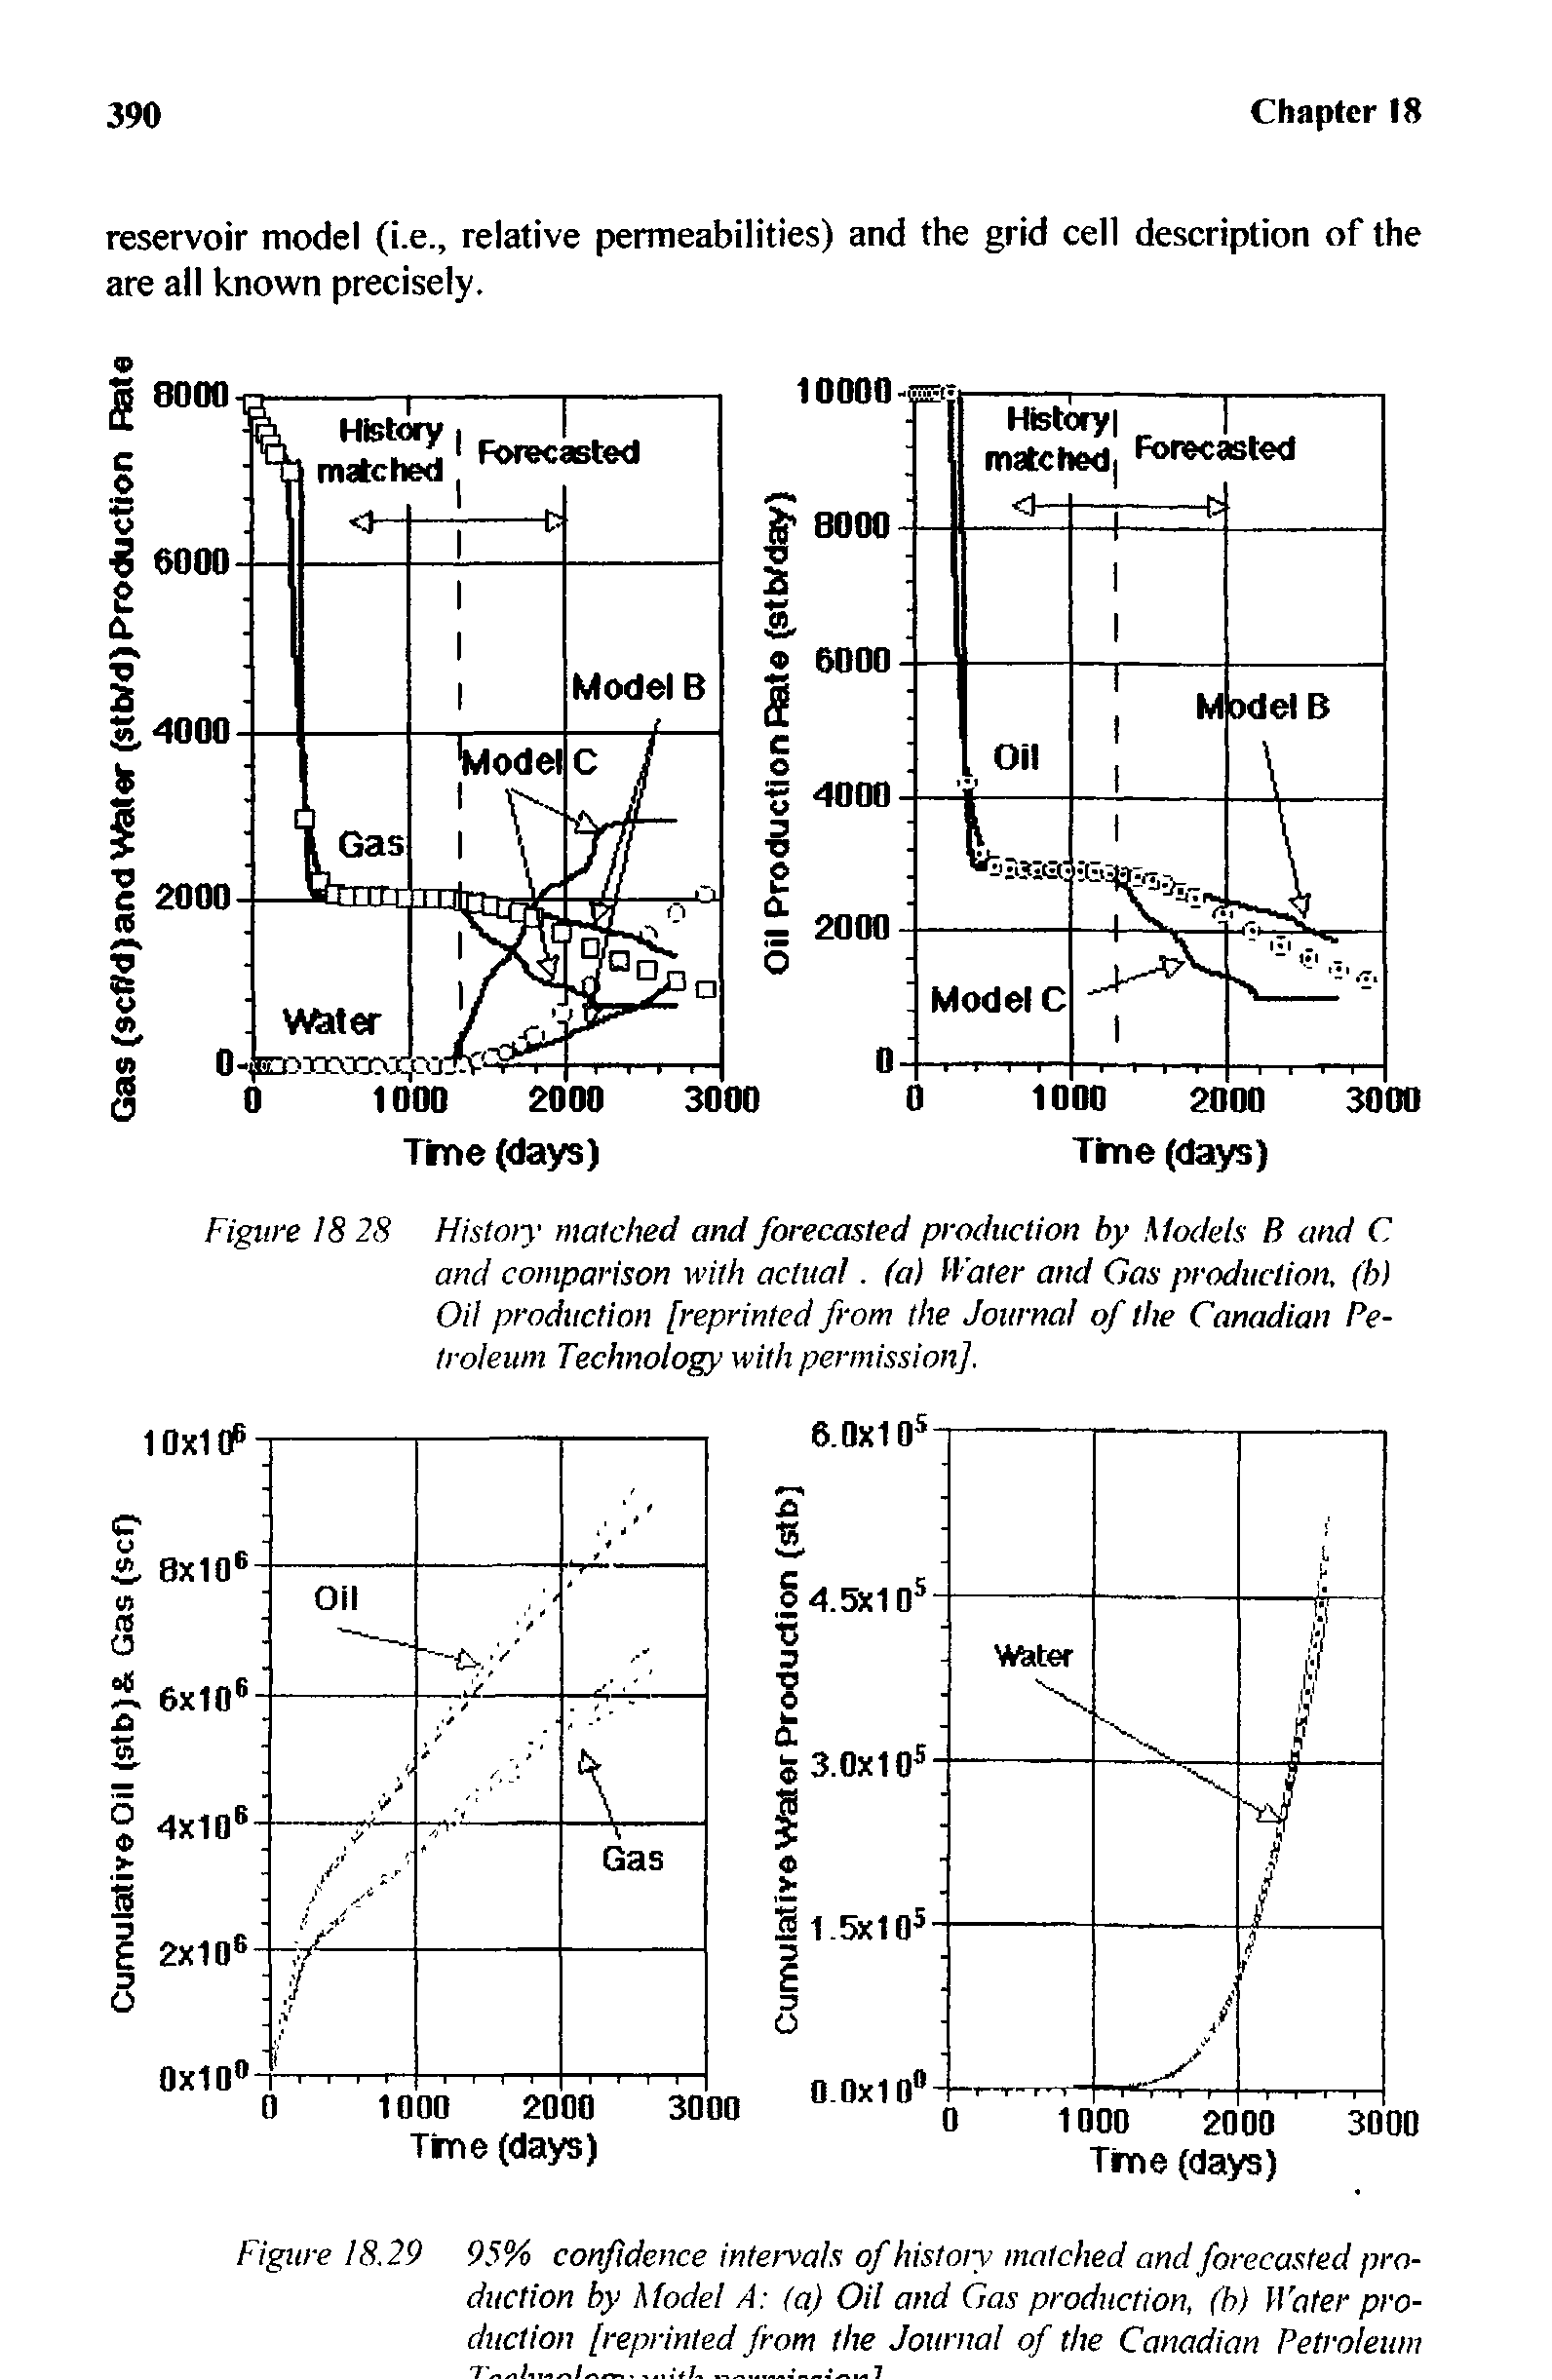 Figure 18 28 History matched and forecasted production by Models B and C, and comparison with actual. (a) Water and Gas production, (h) Oil production [reprinted from the Journal of the Canadian Petroleum Technology with permission].